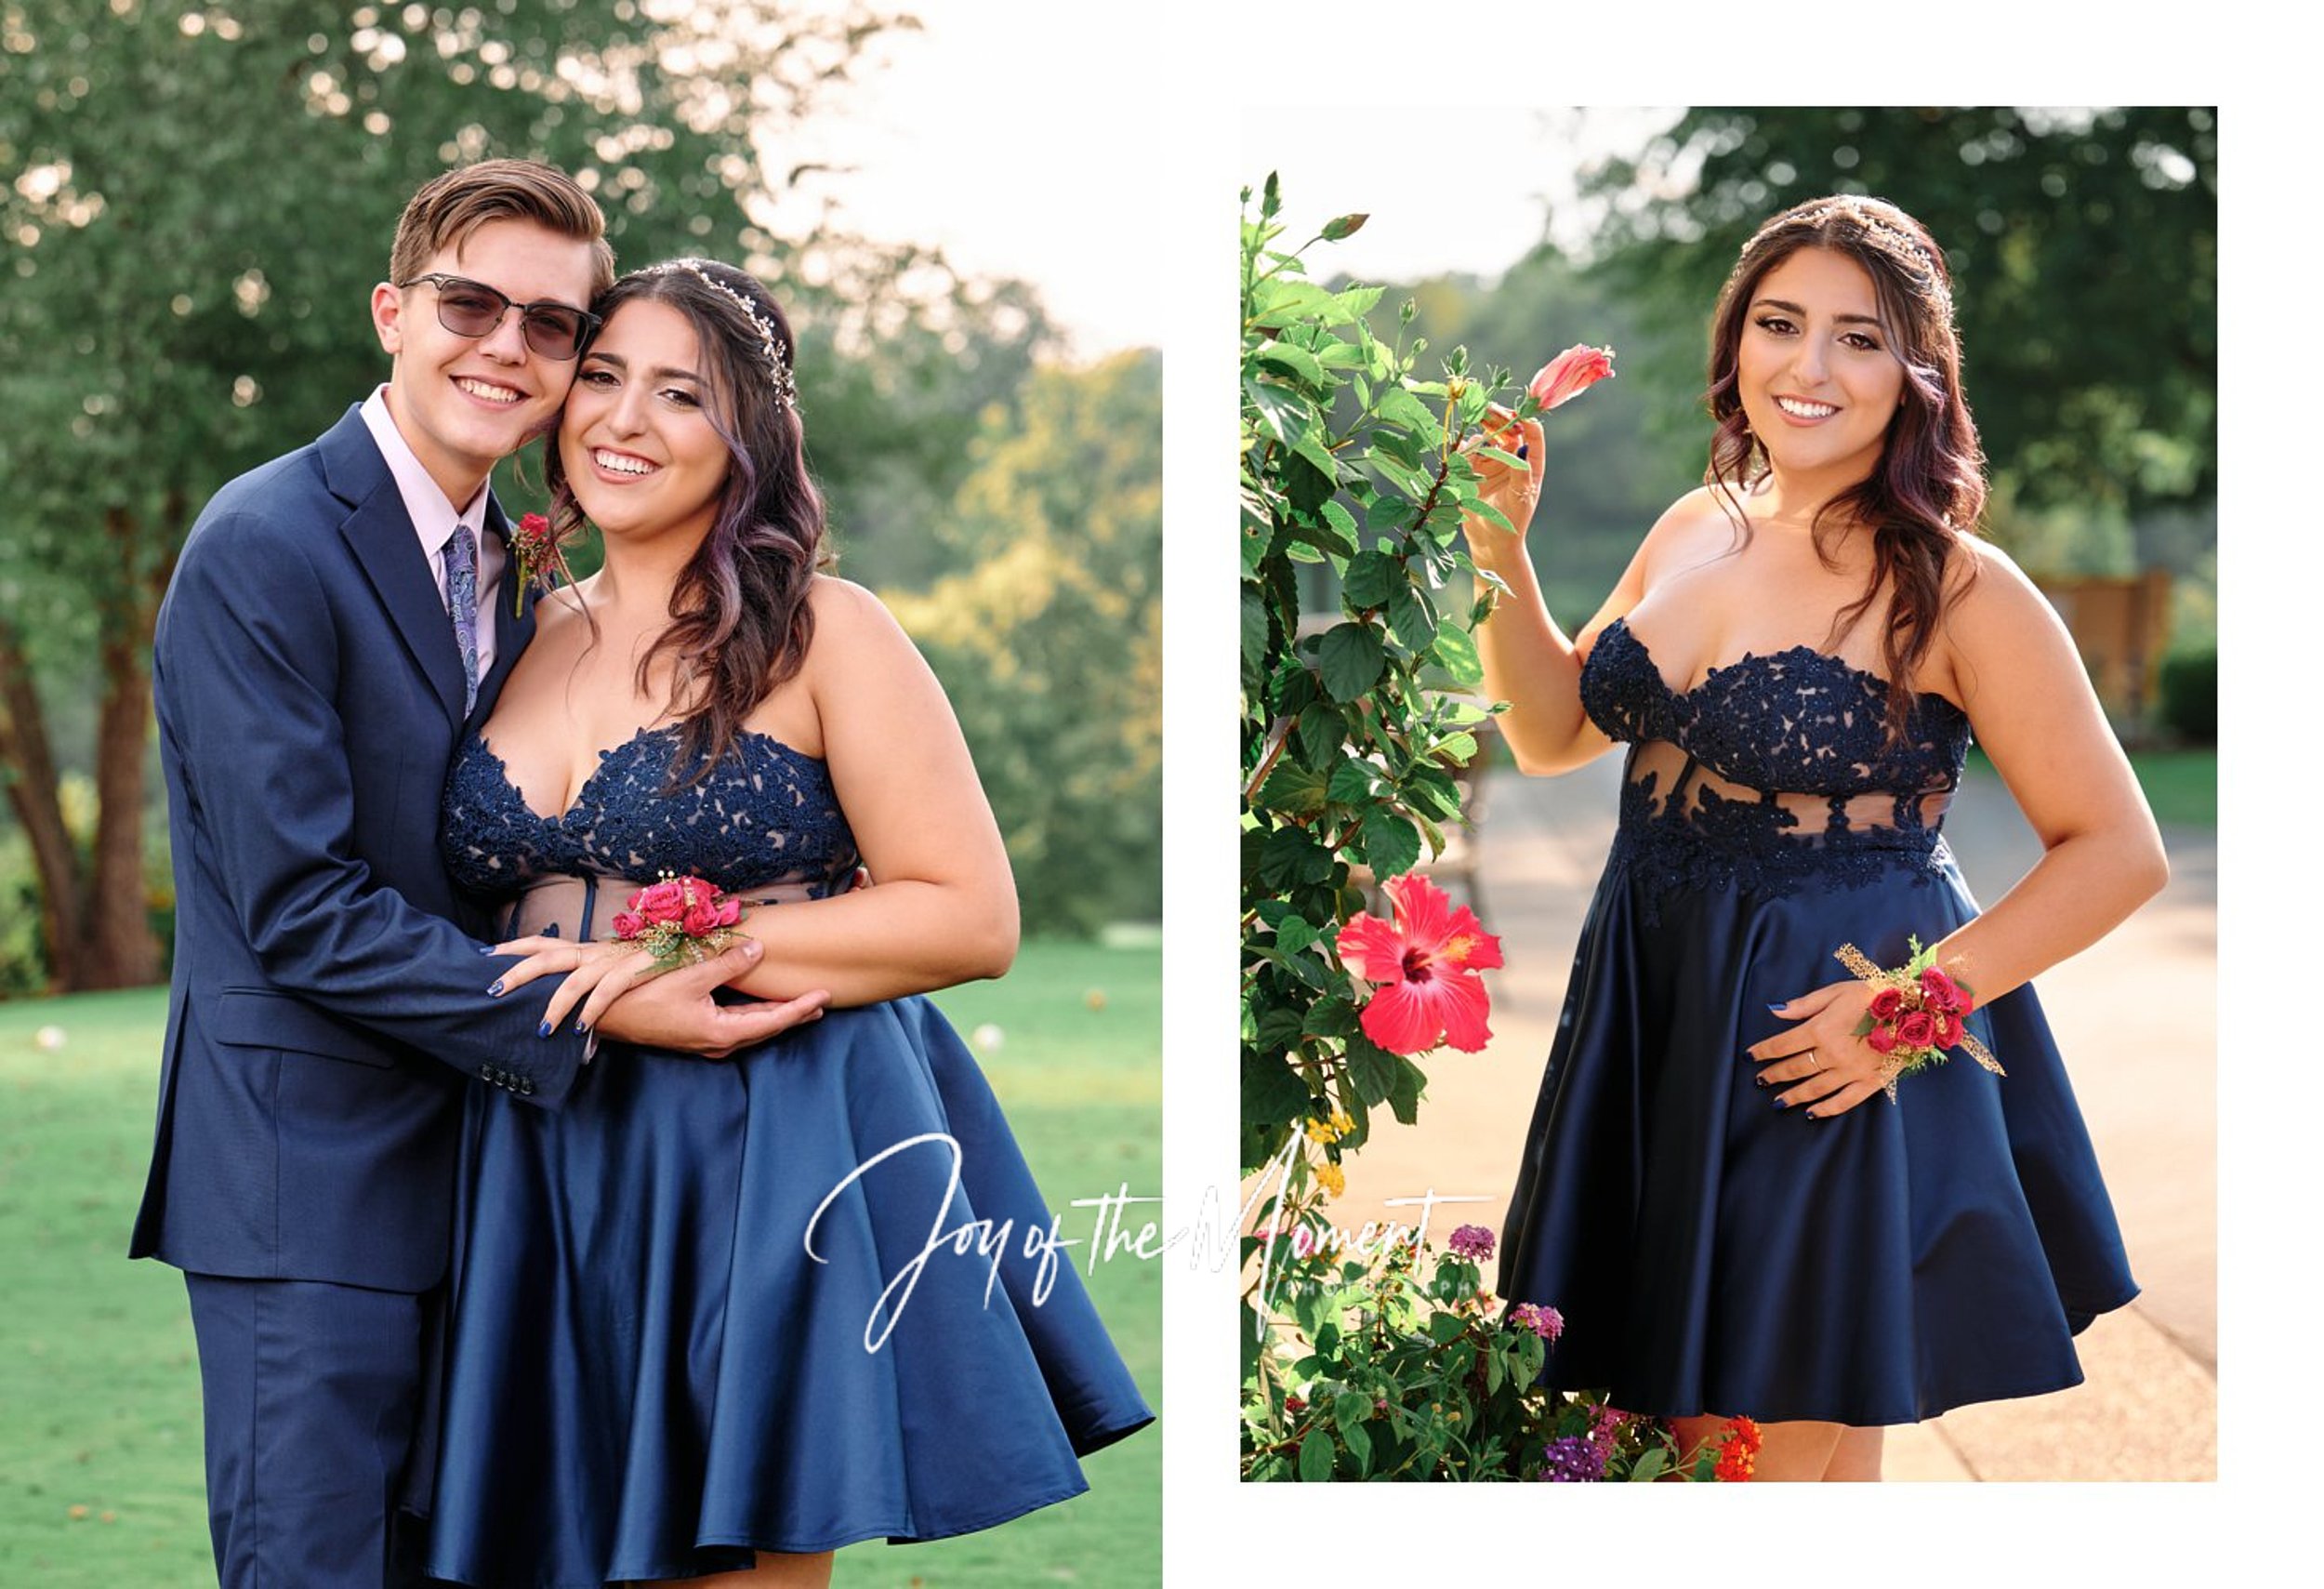  Portraits from Homecoming Dance at Valley Brook Country Club, south of Pittsburgh PA.  Nikki Golestan & Jonathan Robert Colombo, Alexandra Cordle & Griffin Hurt. Four teenagers look happy & beautiful 